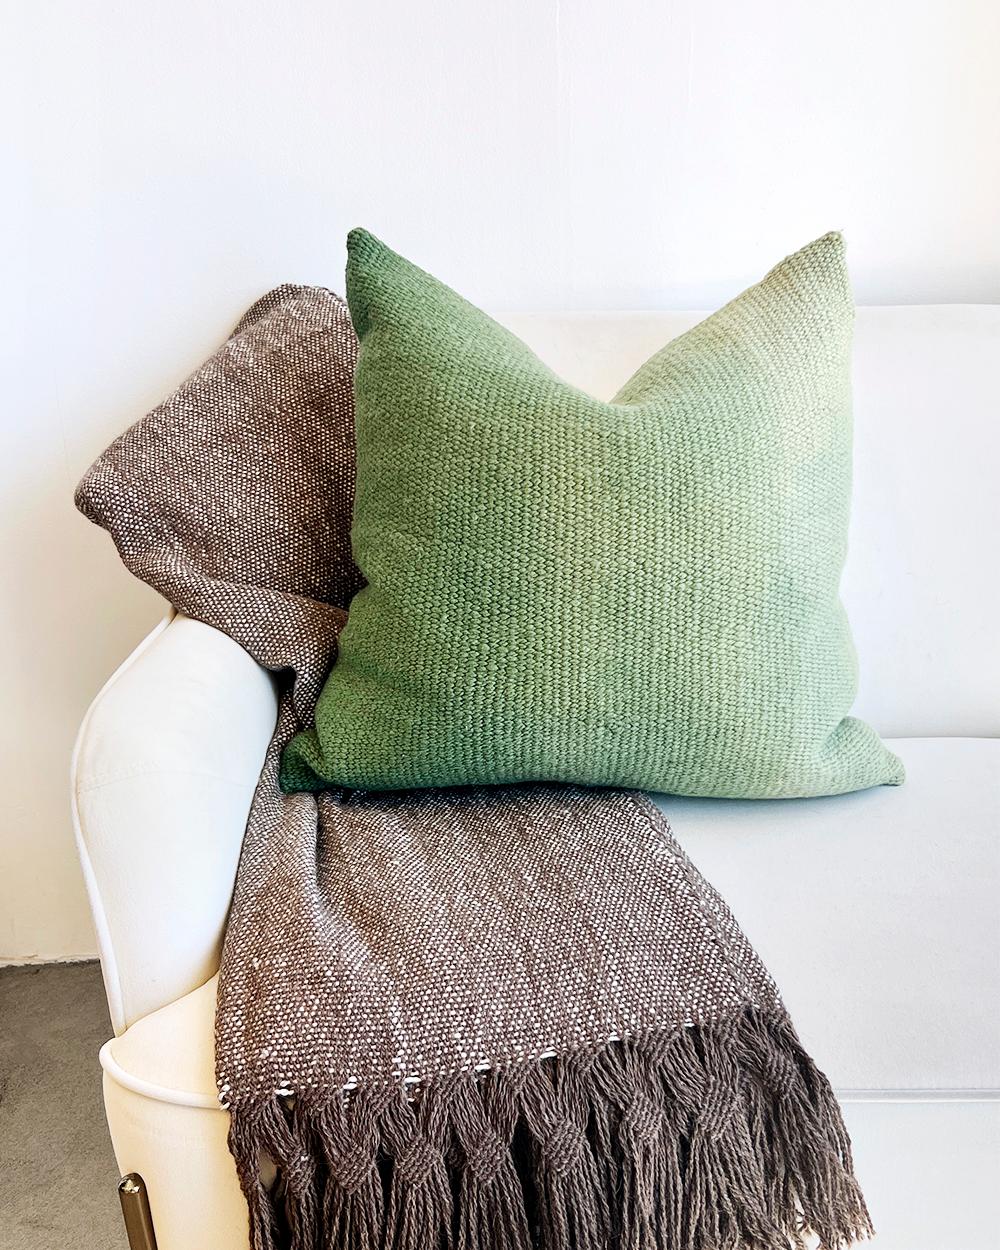 A luxurious throw for your home made from natural llama wool and silk. This artisan home throw has a brown and white weave with brown fringe in a double weave pattern that is unique and eye catching. Pair the brown llama wool throw with a pop of